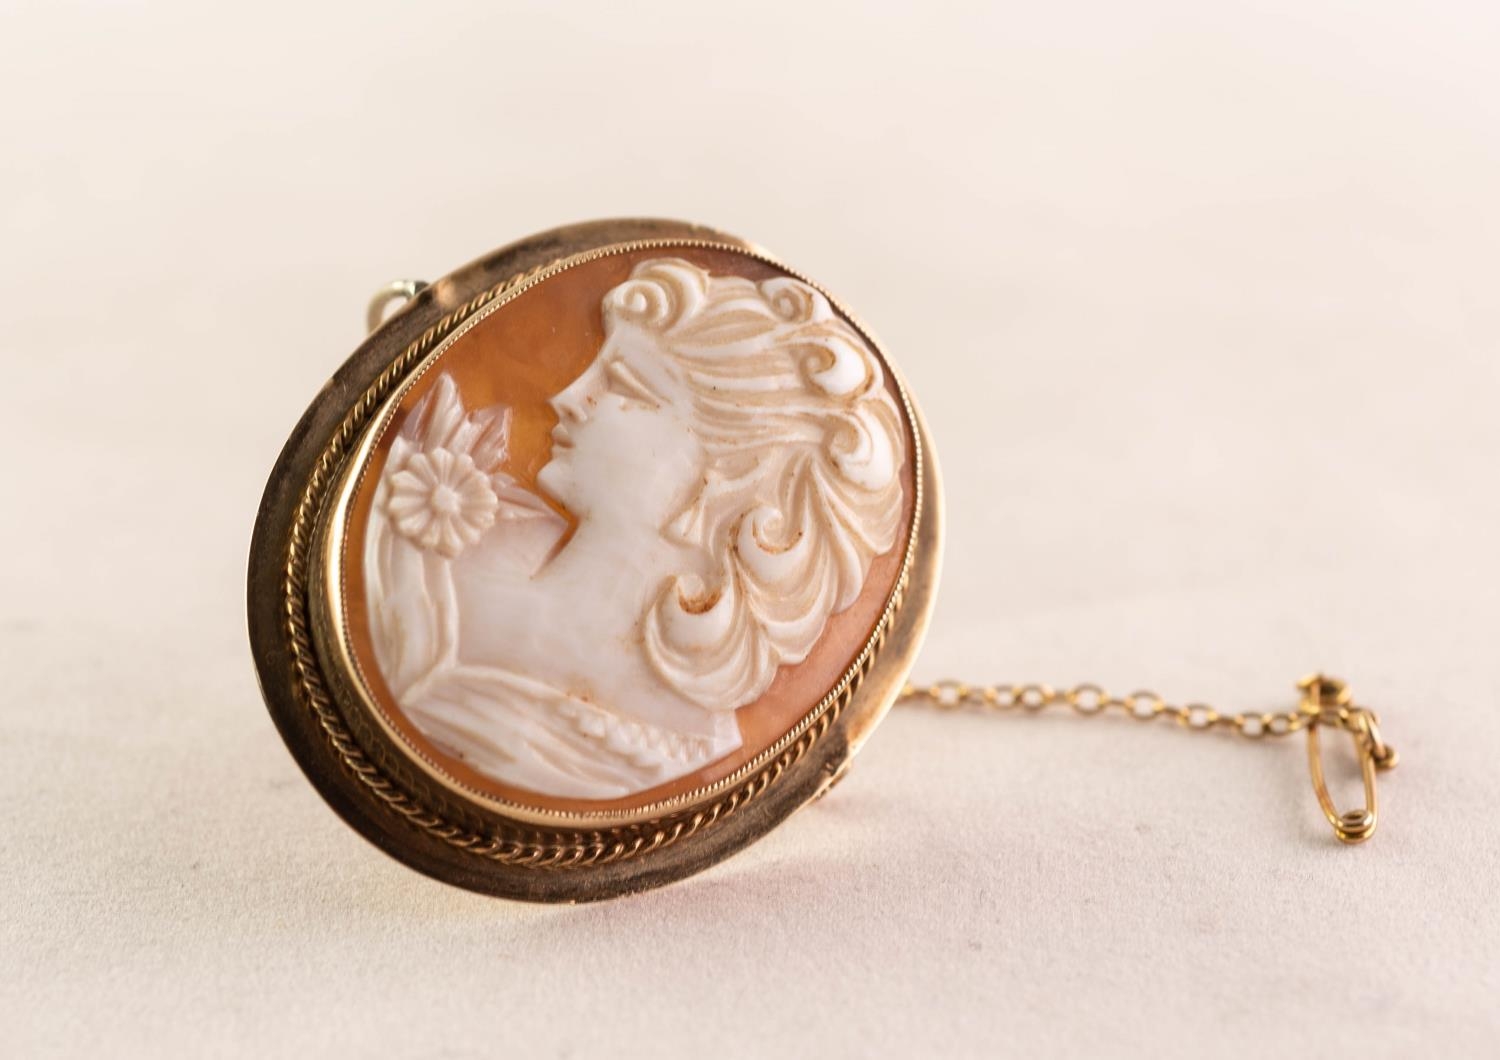 OVAL SHELL CAMEO BROOCH depicting a bust portrait of a lady, in 9ct GOLD FRAME, 1 1/2in (4cm) high